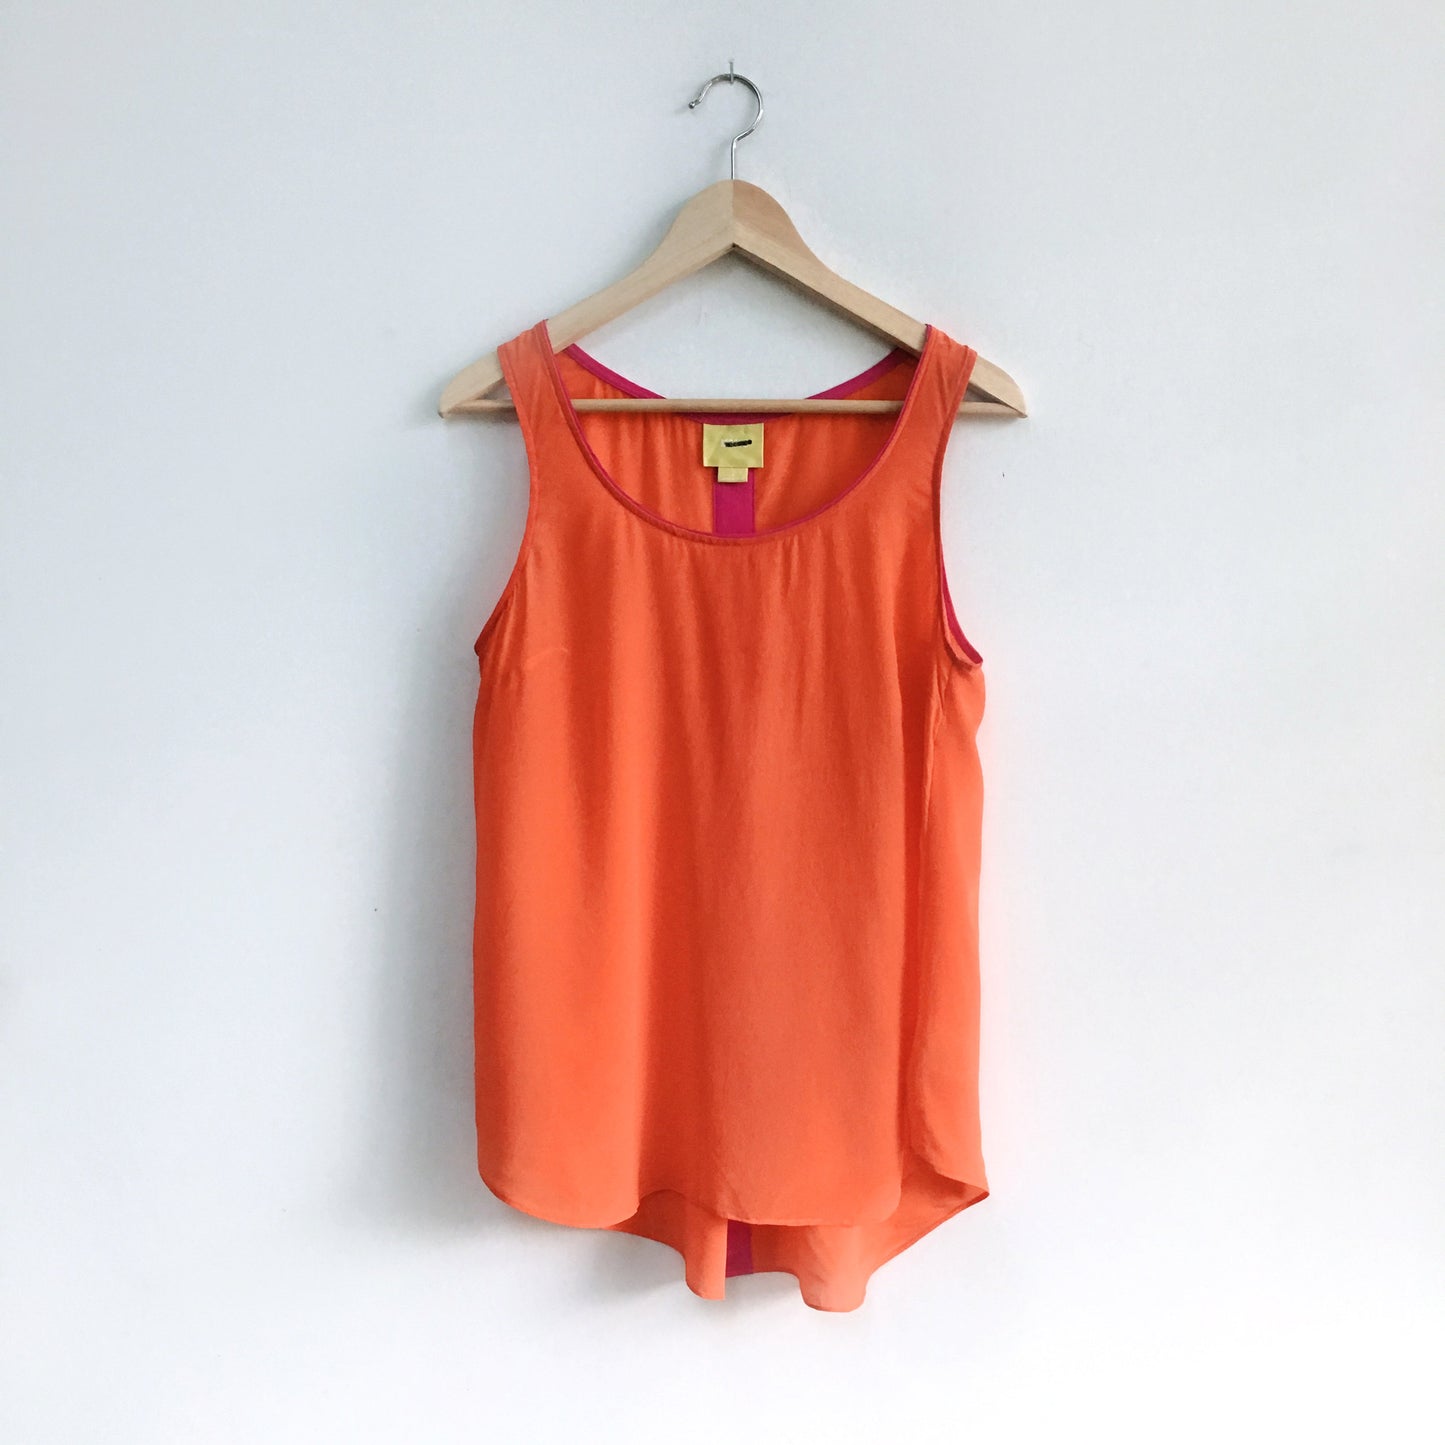 Maeve Piped Silk Tank - size 8